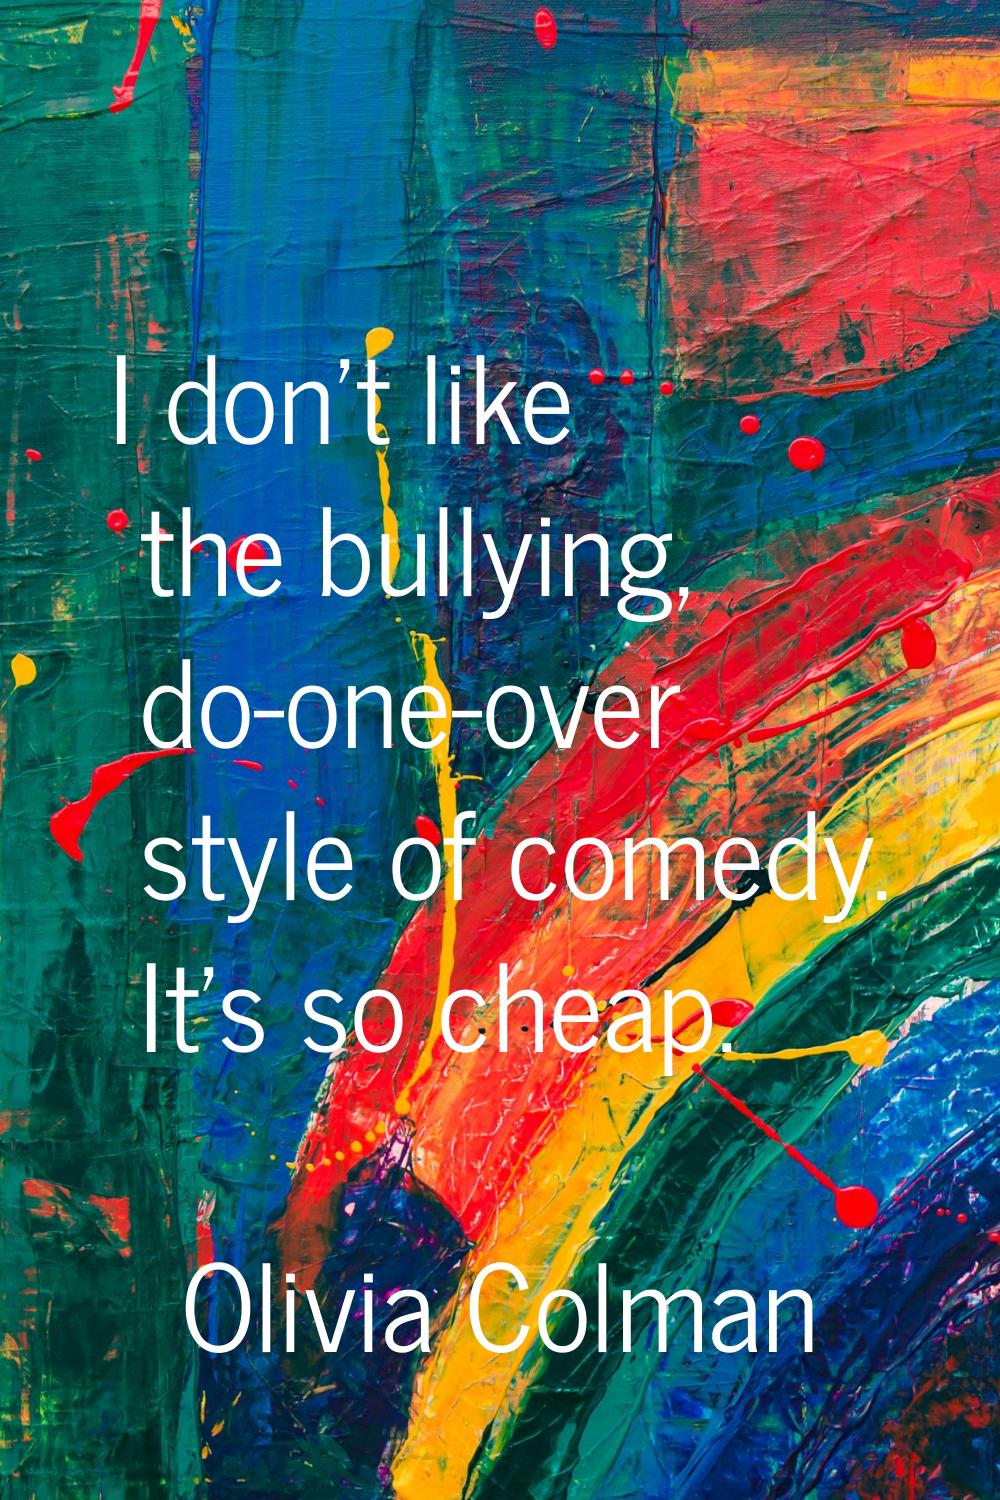 I don't like the bullying, do-one-over style of comedy. It's so cheap.